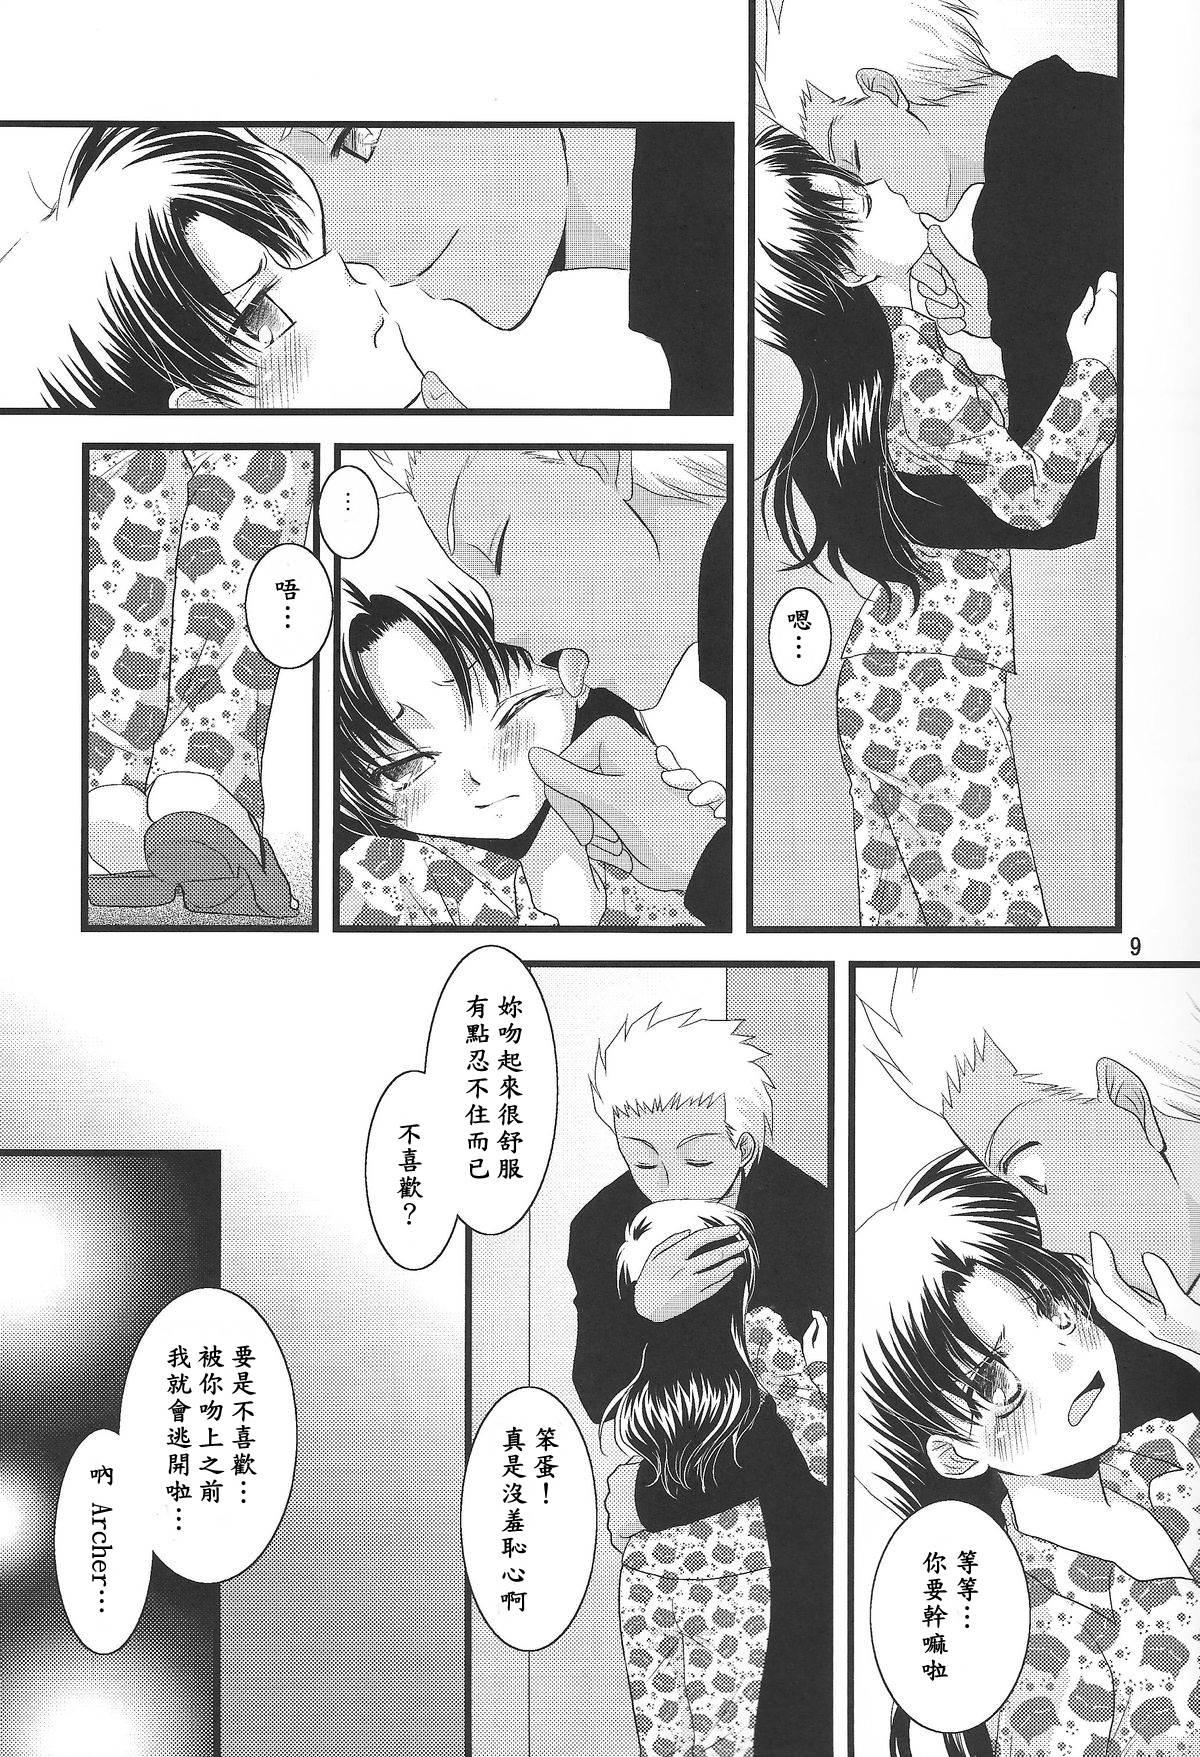 Doggy Style A Midsummer Night's Dream - Fate stay night Gay Pornstar - Page 6